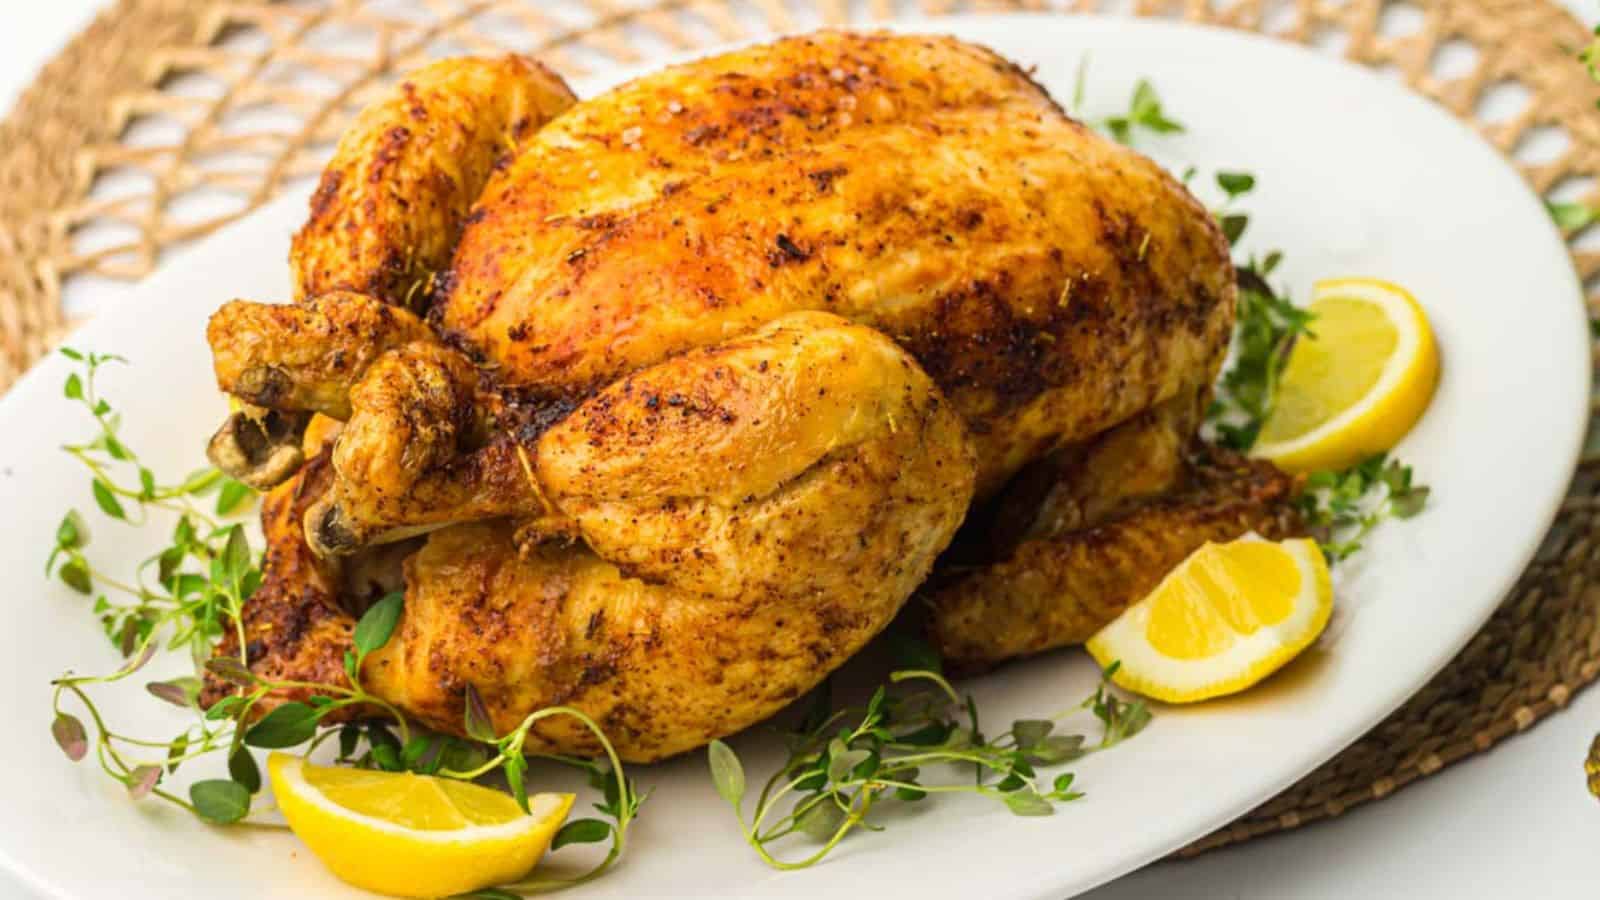 Roasted air fryer whole chicken served on a white plate with lemon wedges.